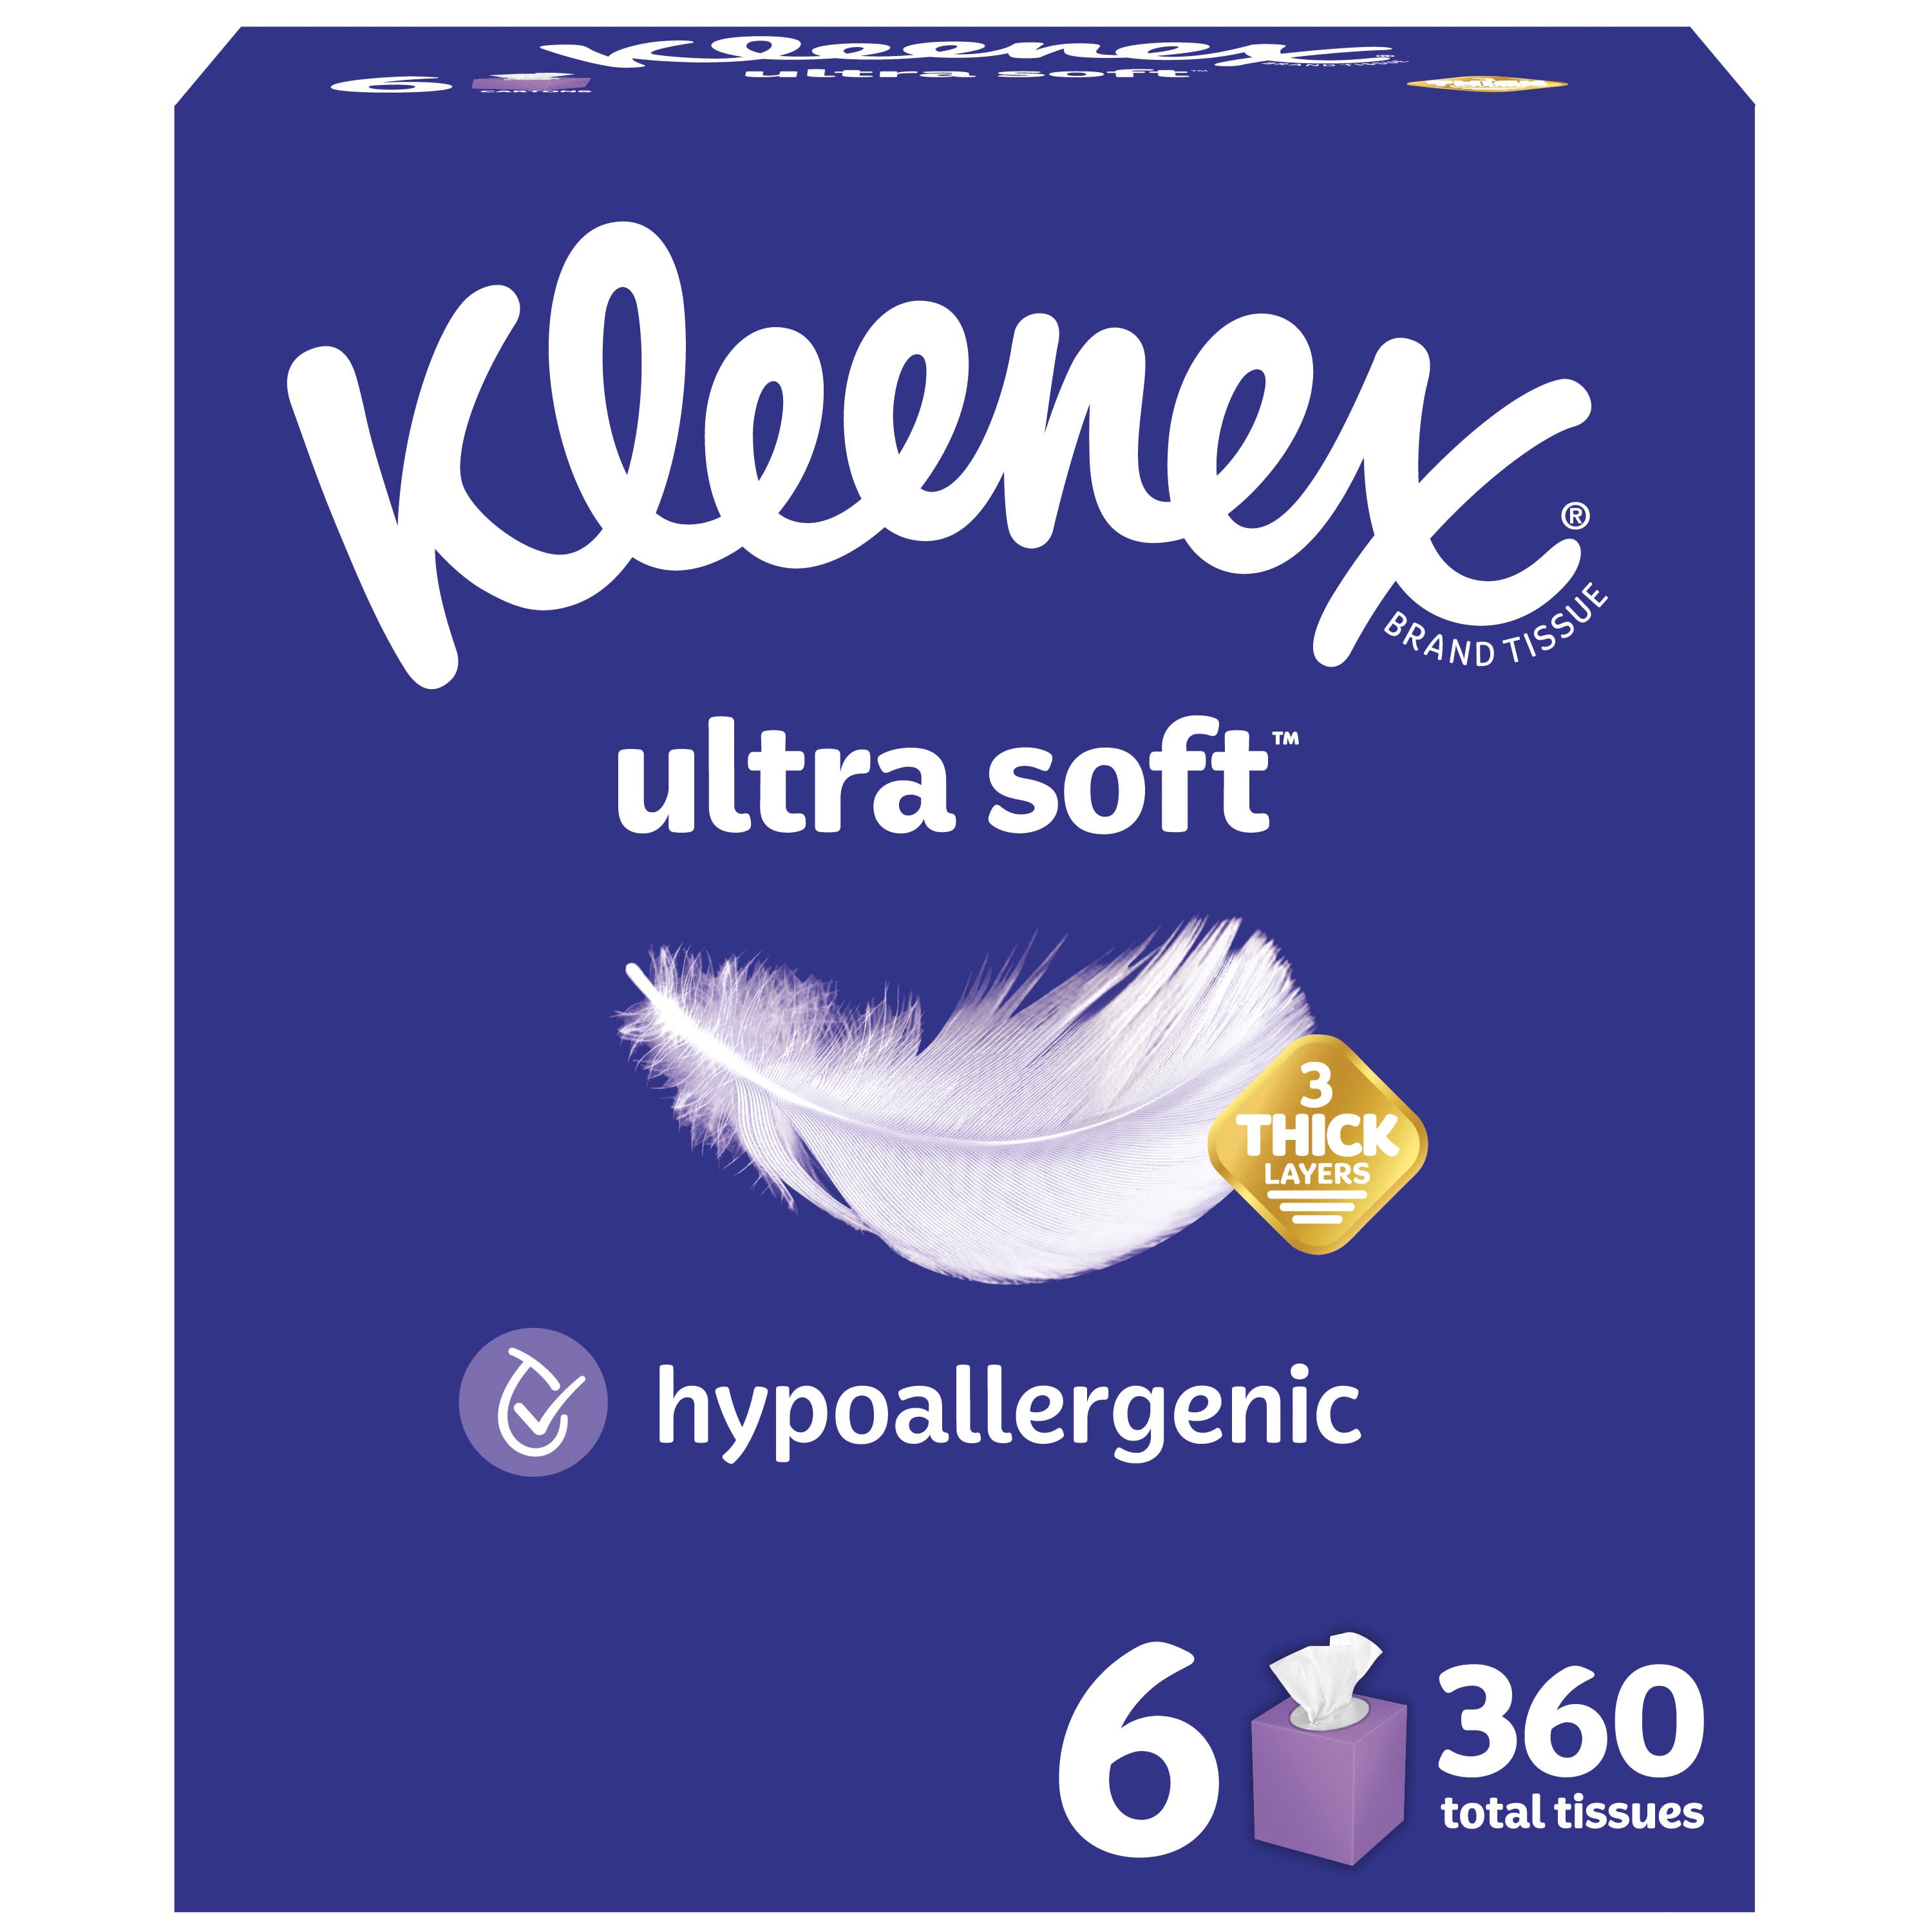 Kleenex Ultra Soft Facial Tissues, 6 Cube Boxes - image 1 of 11